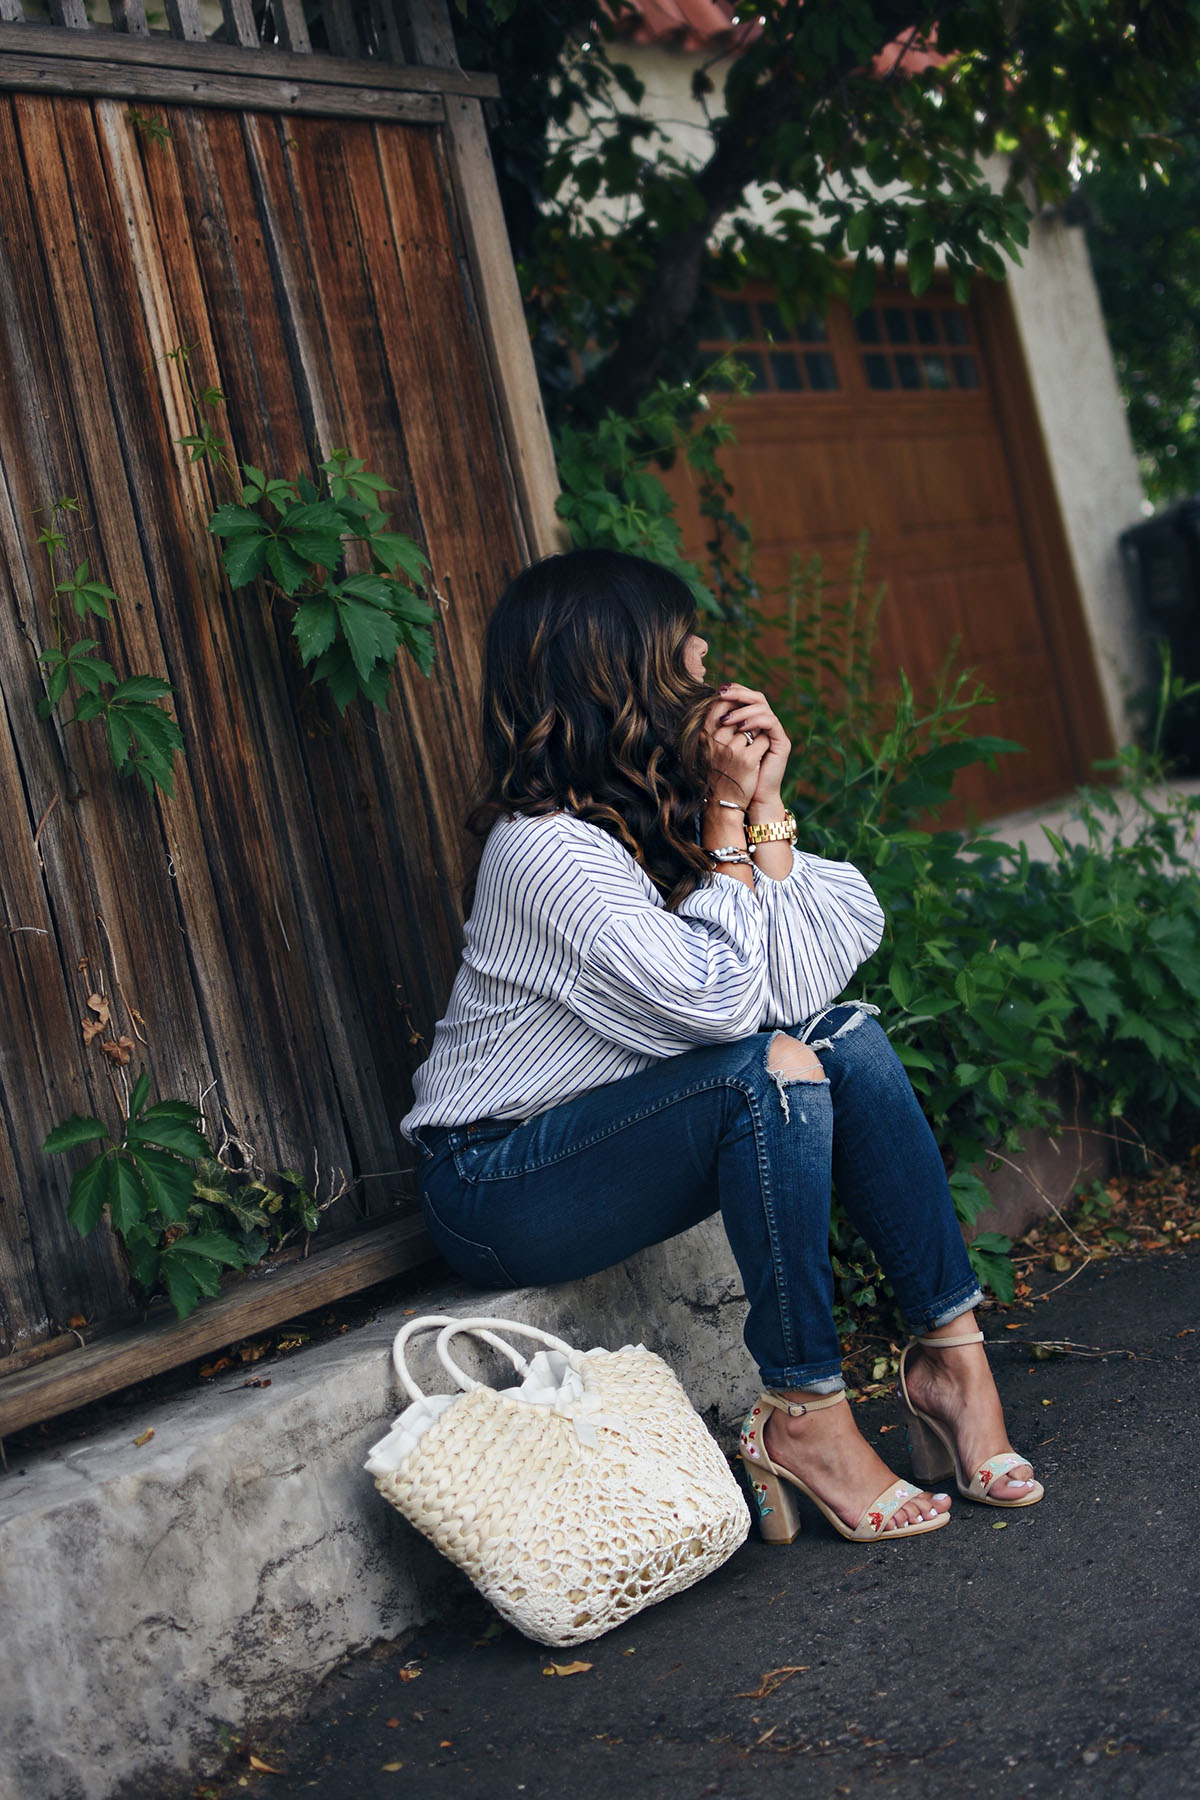 Carolina Hellal of Chic Talk wearing a Shein striped top, Madewell jeans, public Desire sandals and Shein beach bag